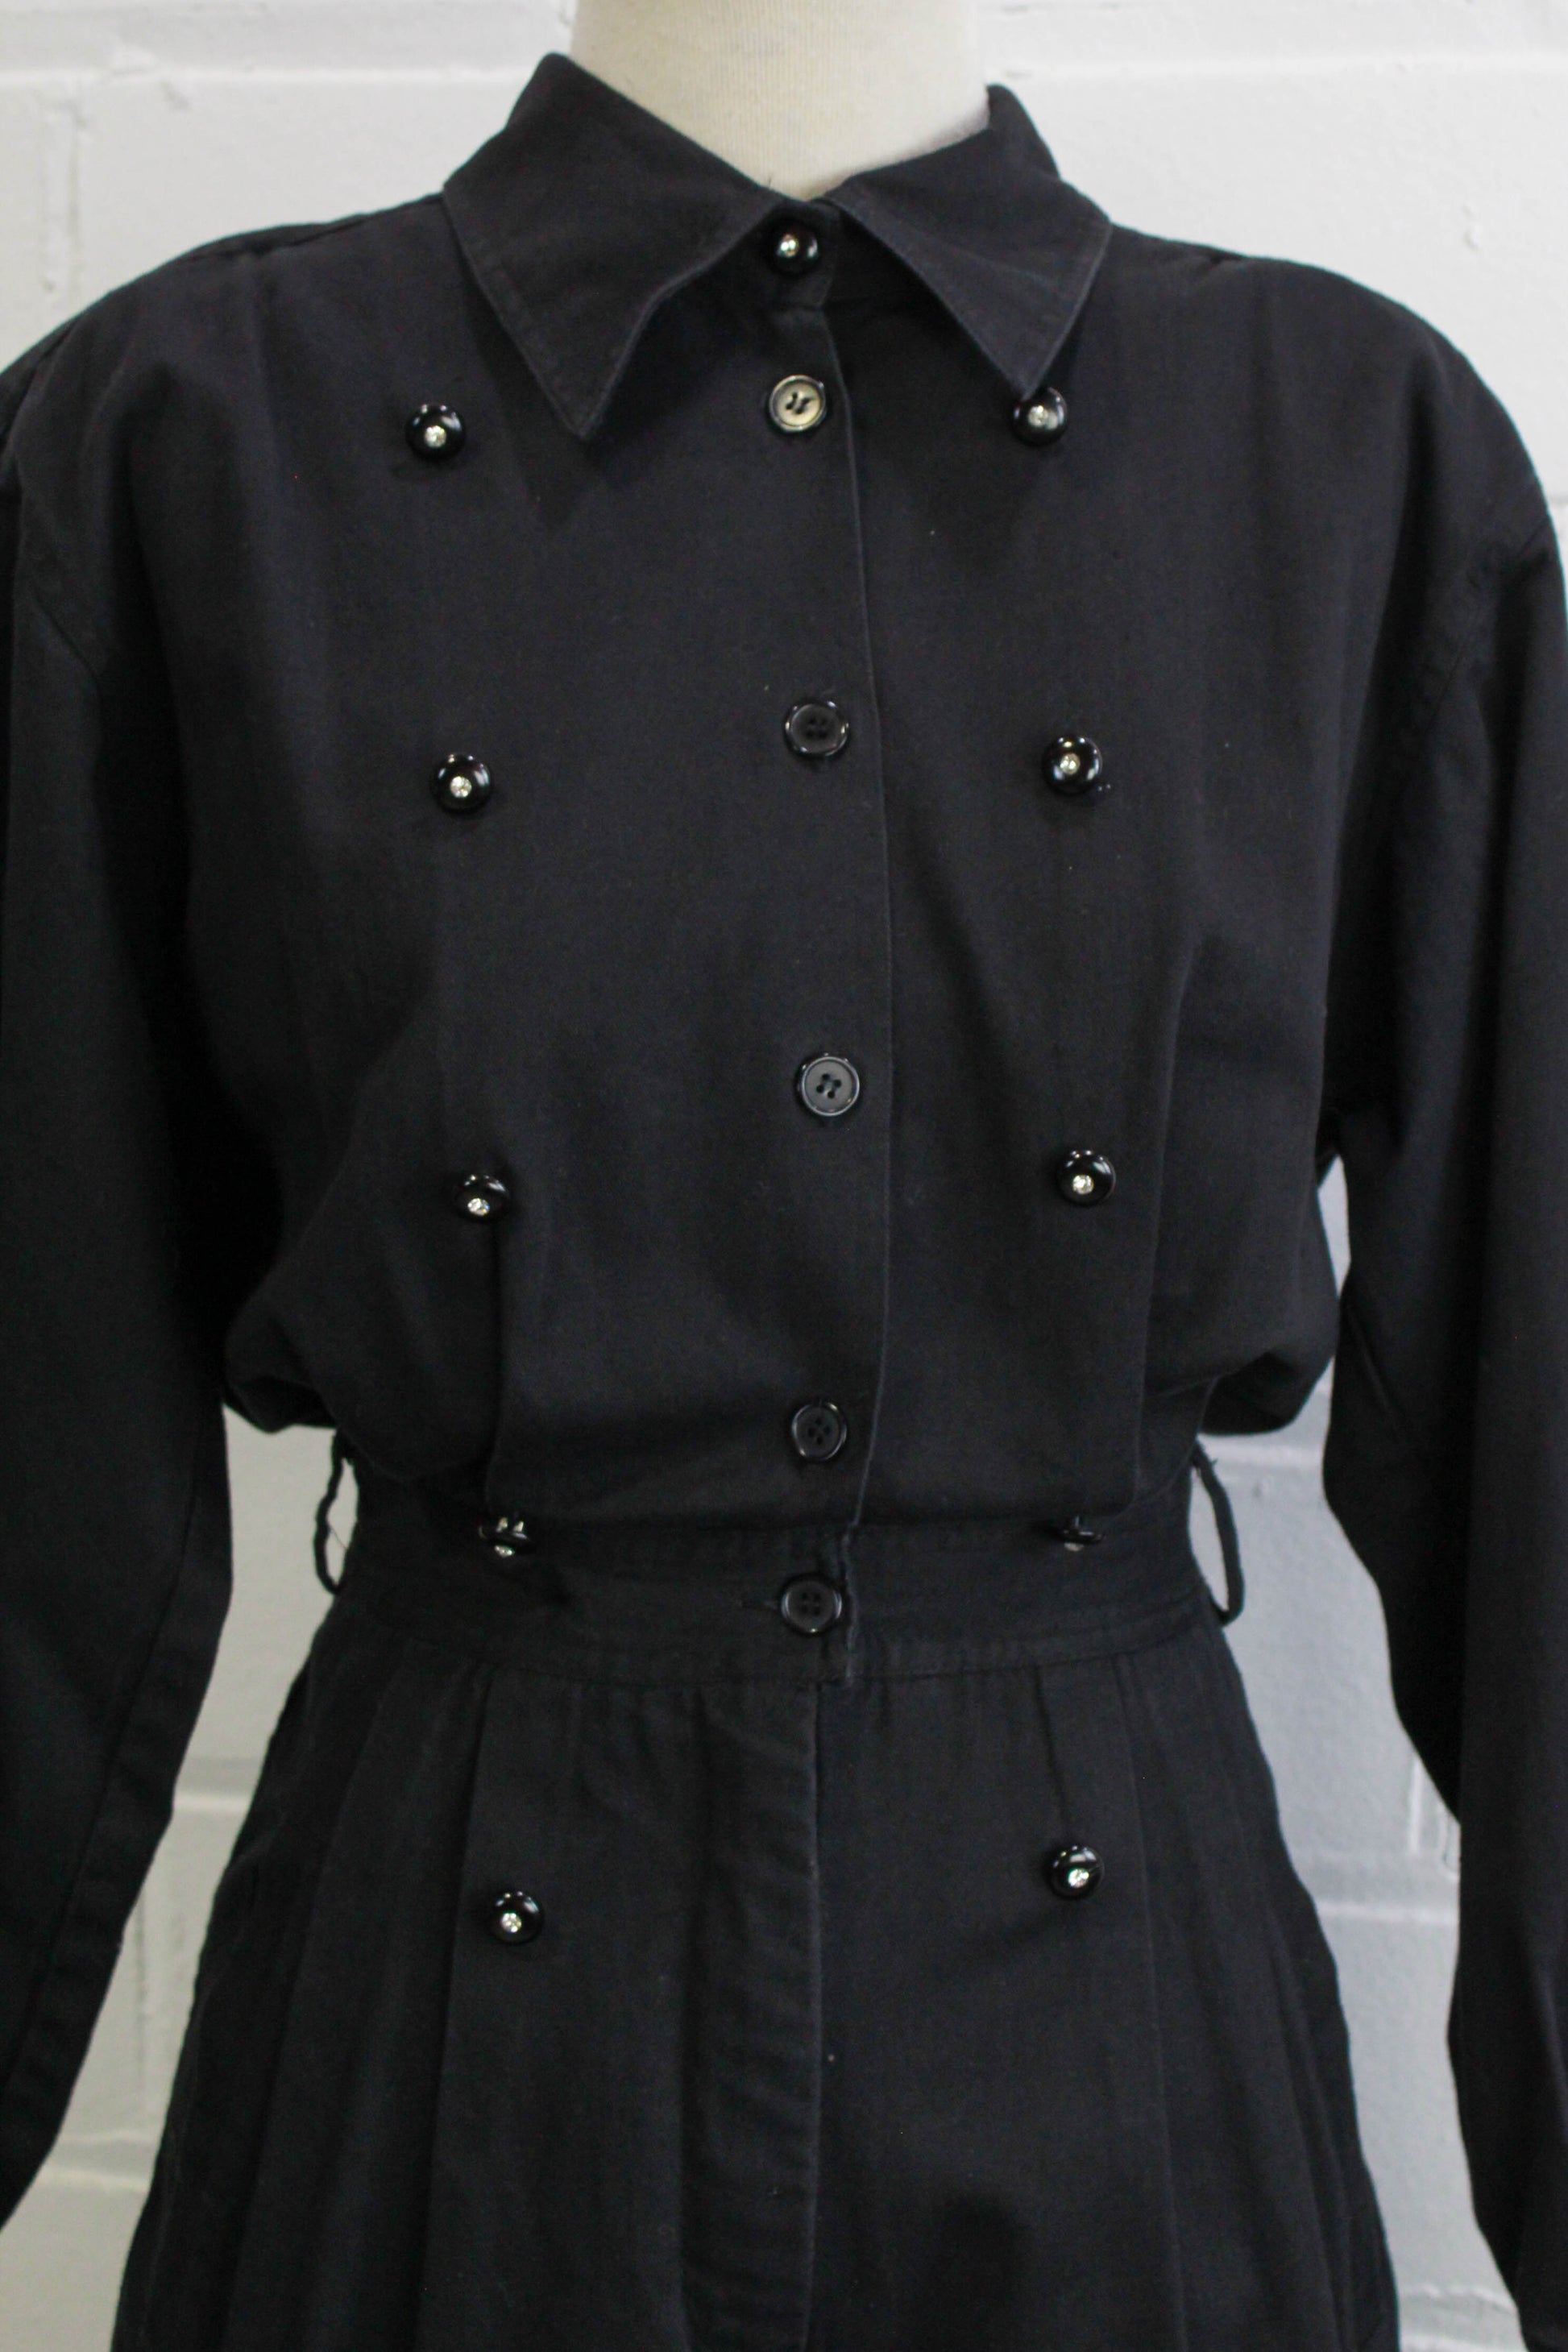 1980s womens jumpsuit black cotton with bib front, collar button up front without bib 